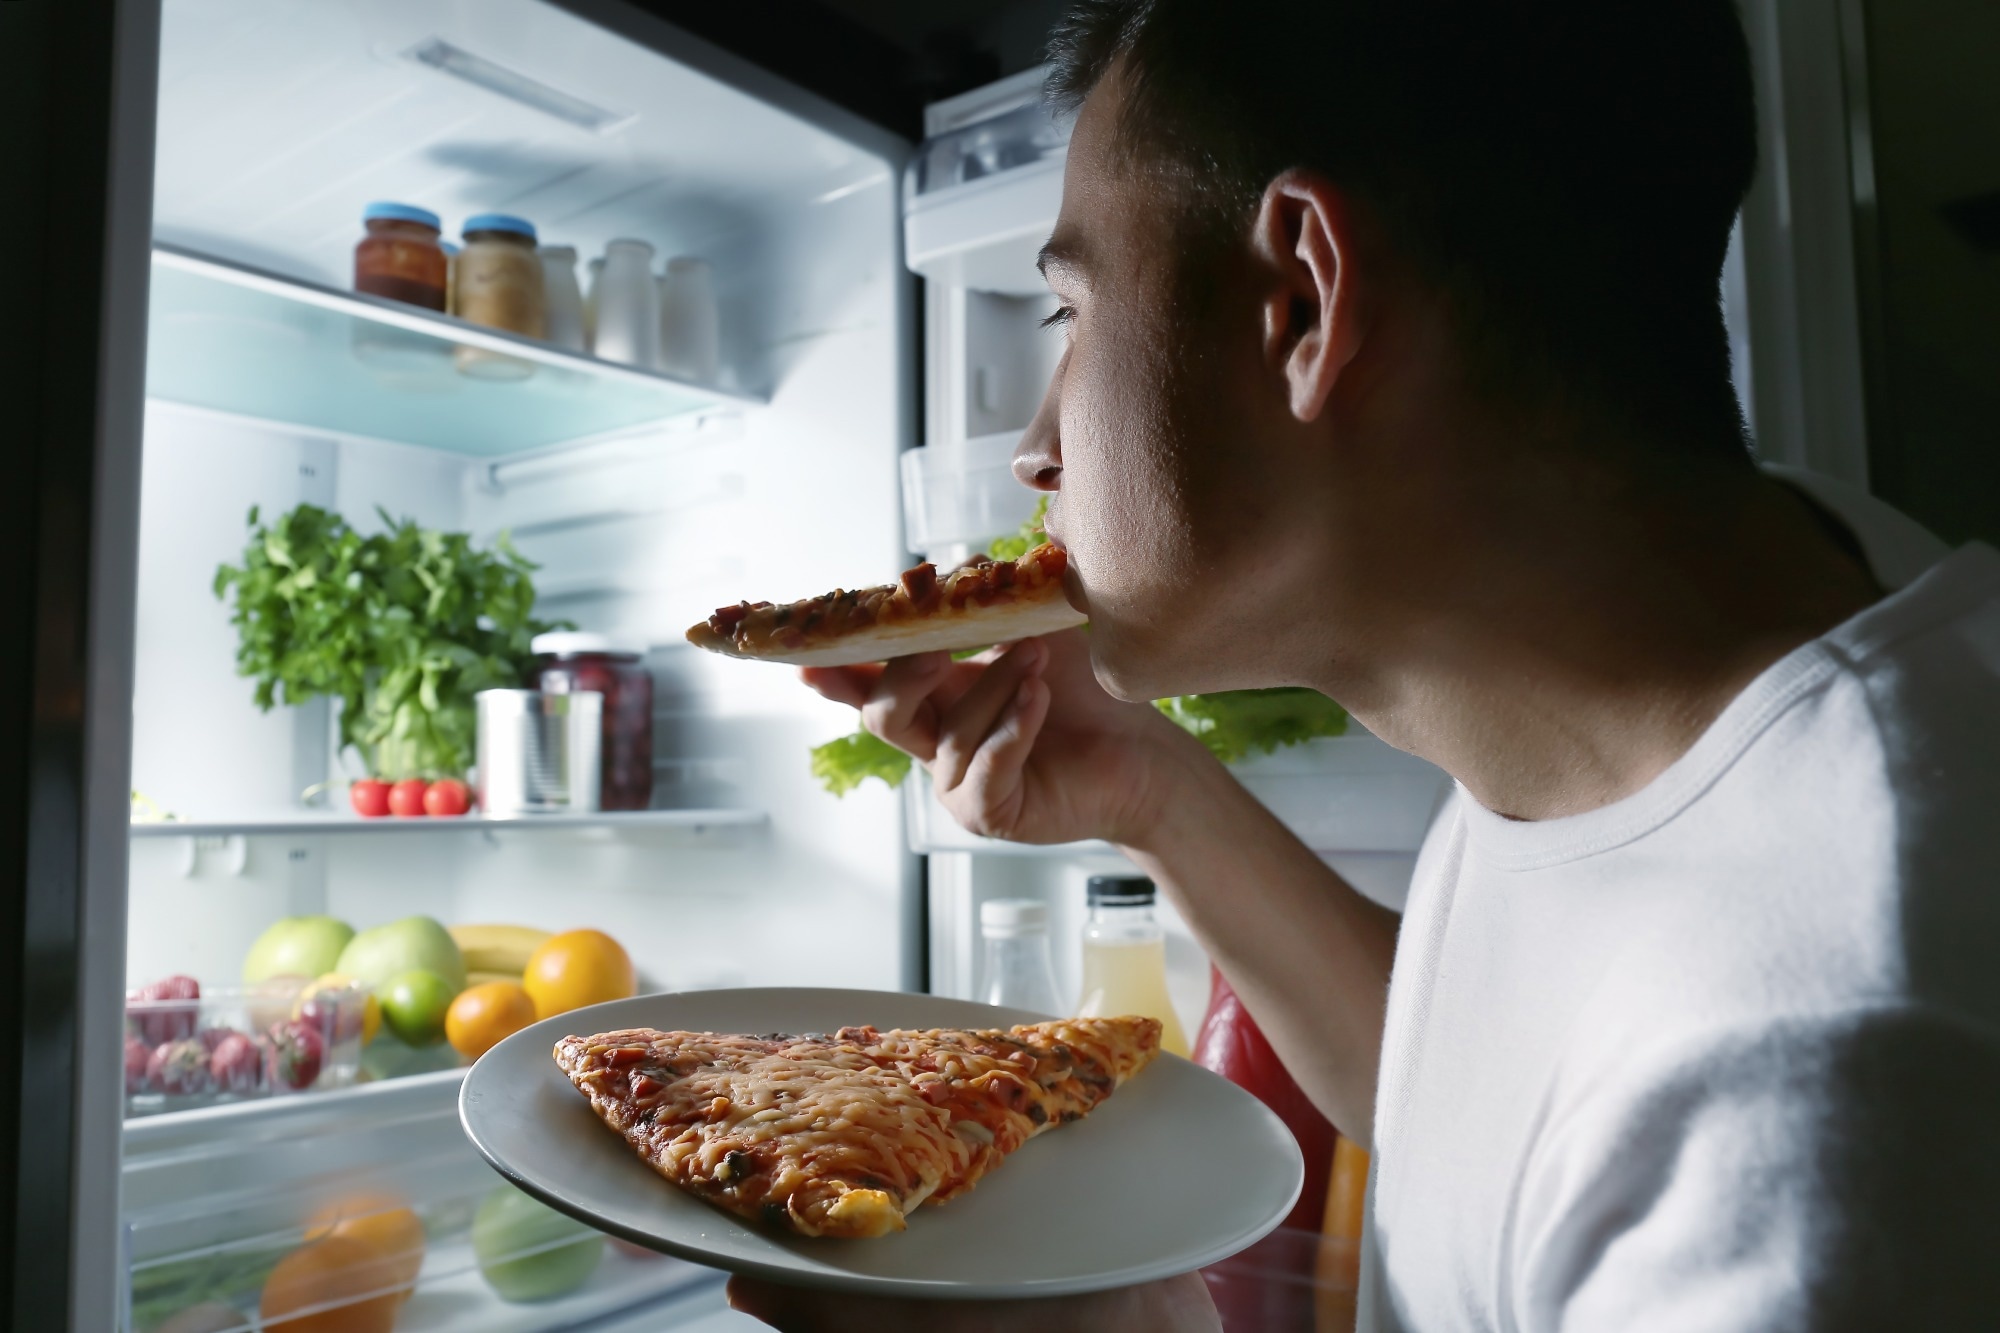 Study: Association between late eating pattern and increased consumption of ultra-processed foods among Italian adults: findings from the INHES study.  Image Credit: Pixel-shot / Shutterstock